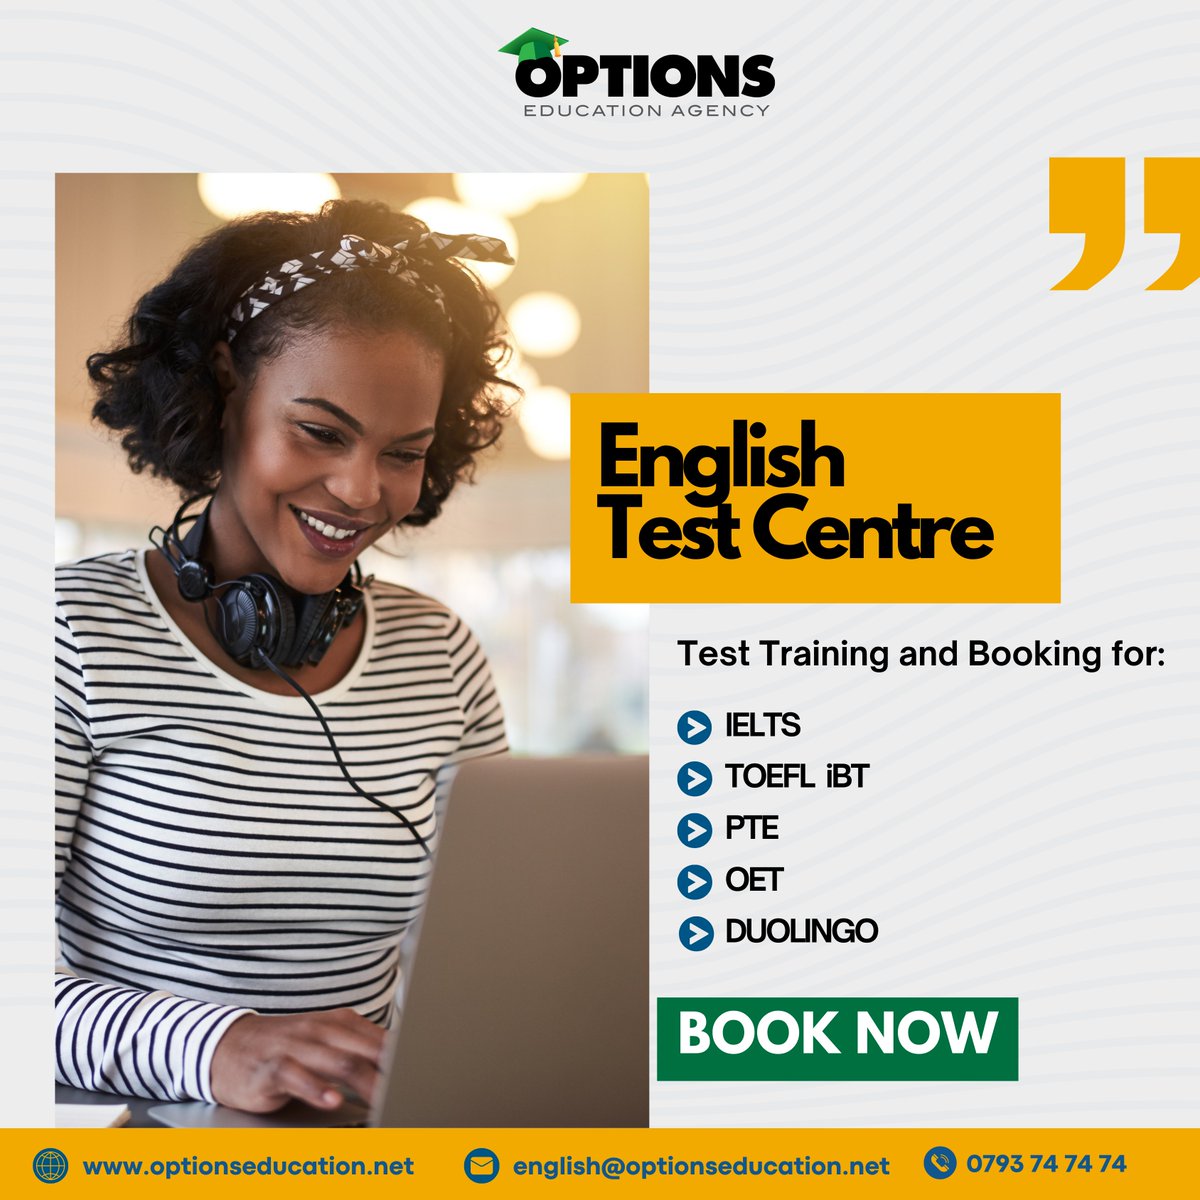 Ace Your English Tests with Us! Test Training & Booking for IELTS, PTE, TOEFL iBT, Duolingo, and OET. Call now: 0793 74 74 74 to Get Started. #studyabroad #englishtests